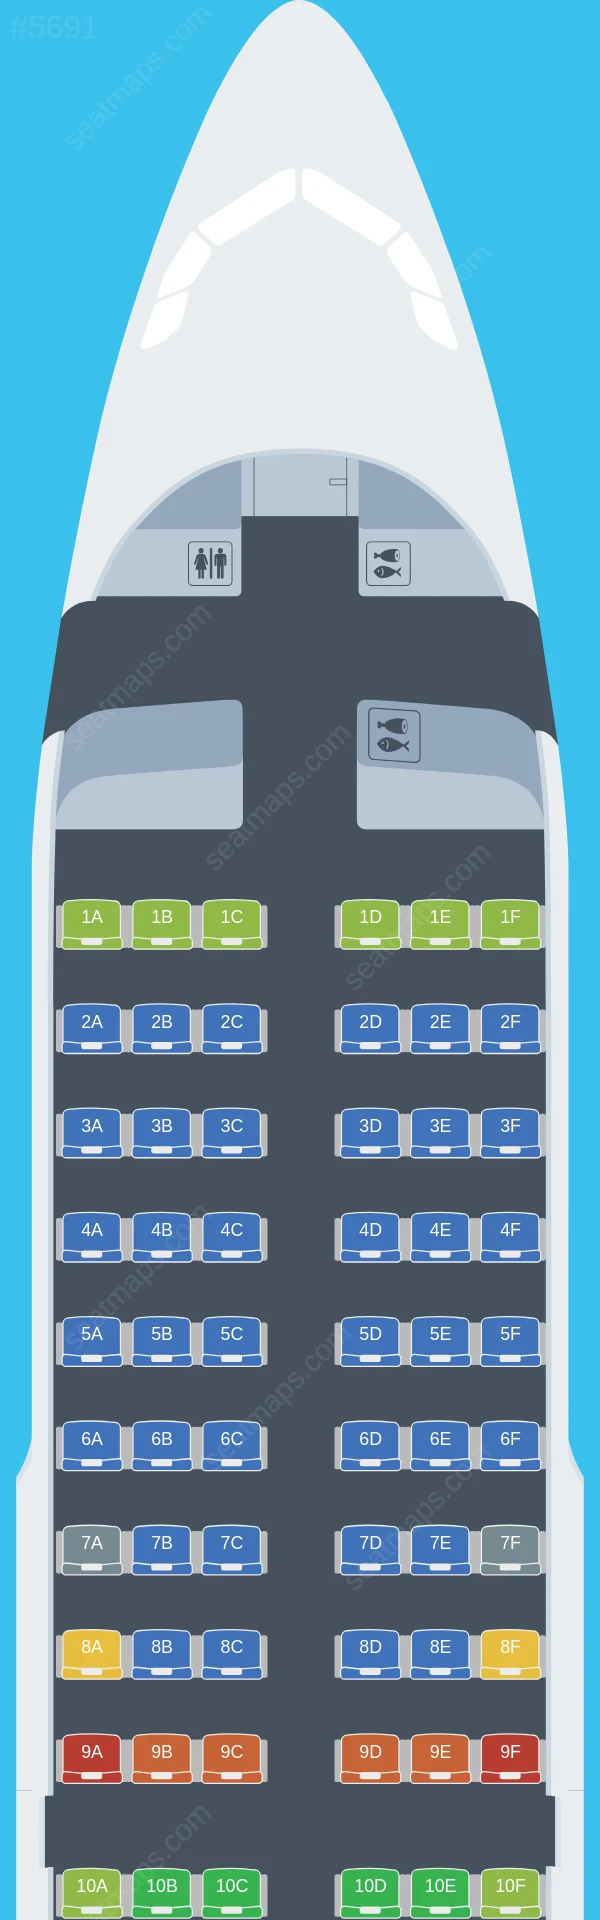 British Airways Airbus A319-100 V.2 seatmap preview